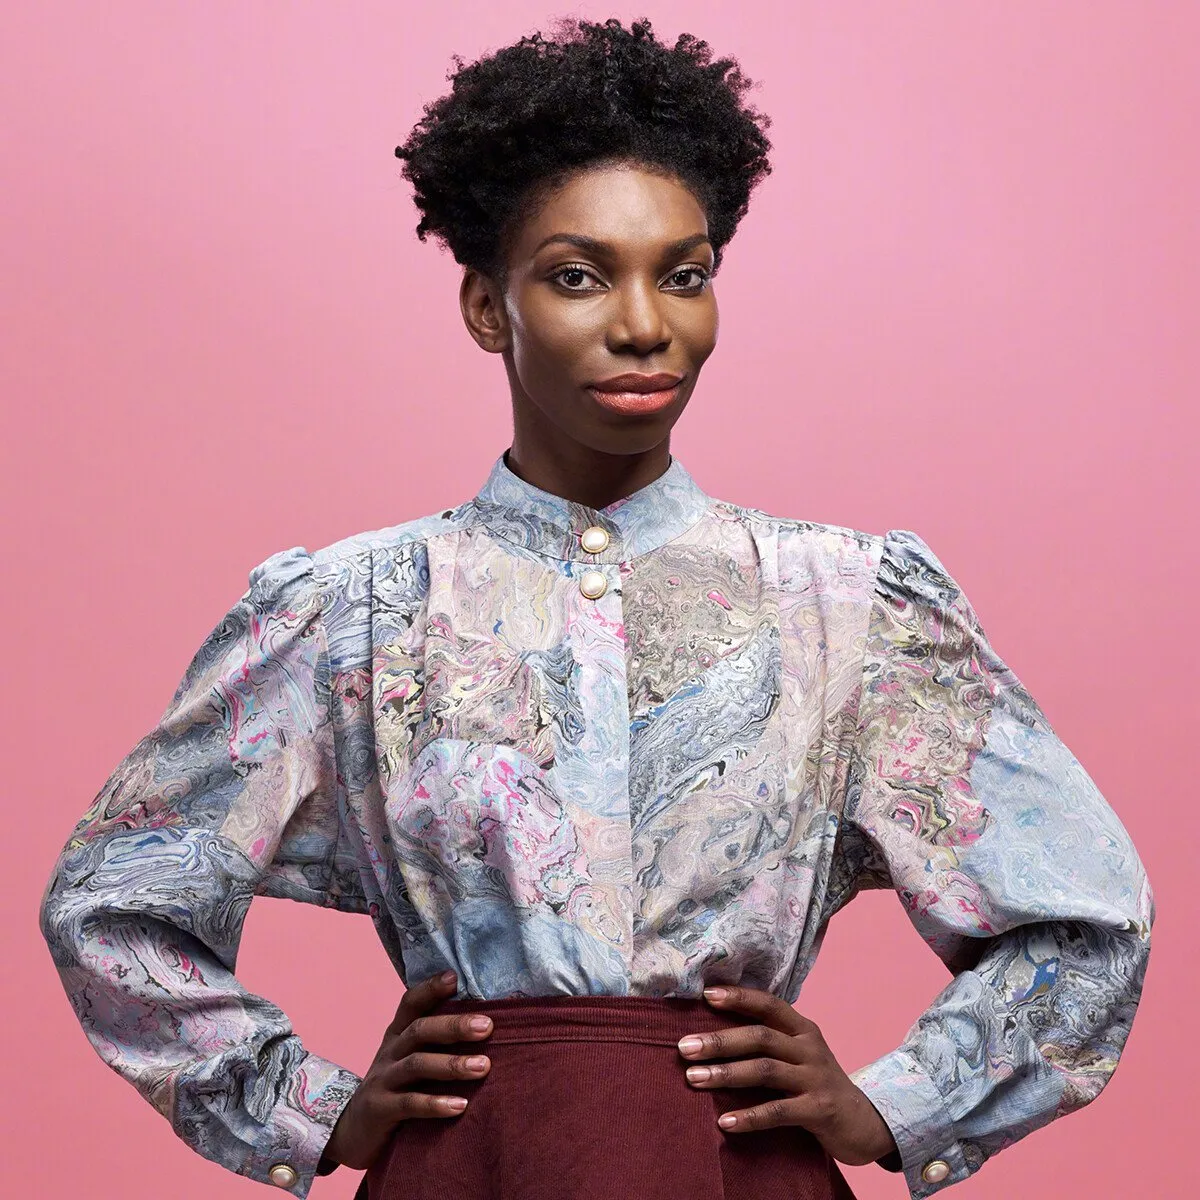 Michaela Coel, John Turturro and Paul Dano join the TV version of "Mr. & Mrs. Smith" in guest roles | FMV6